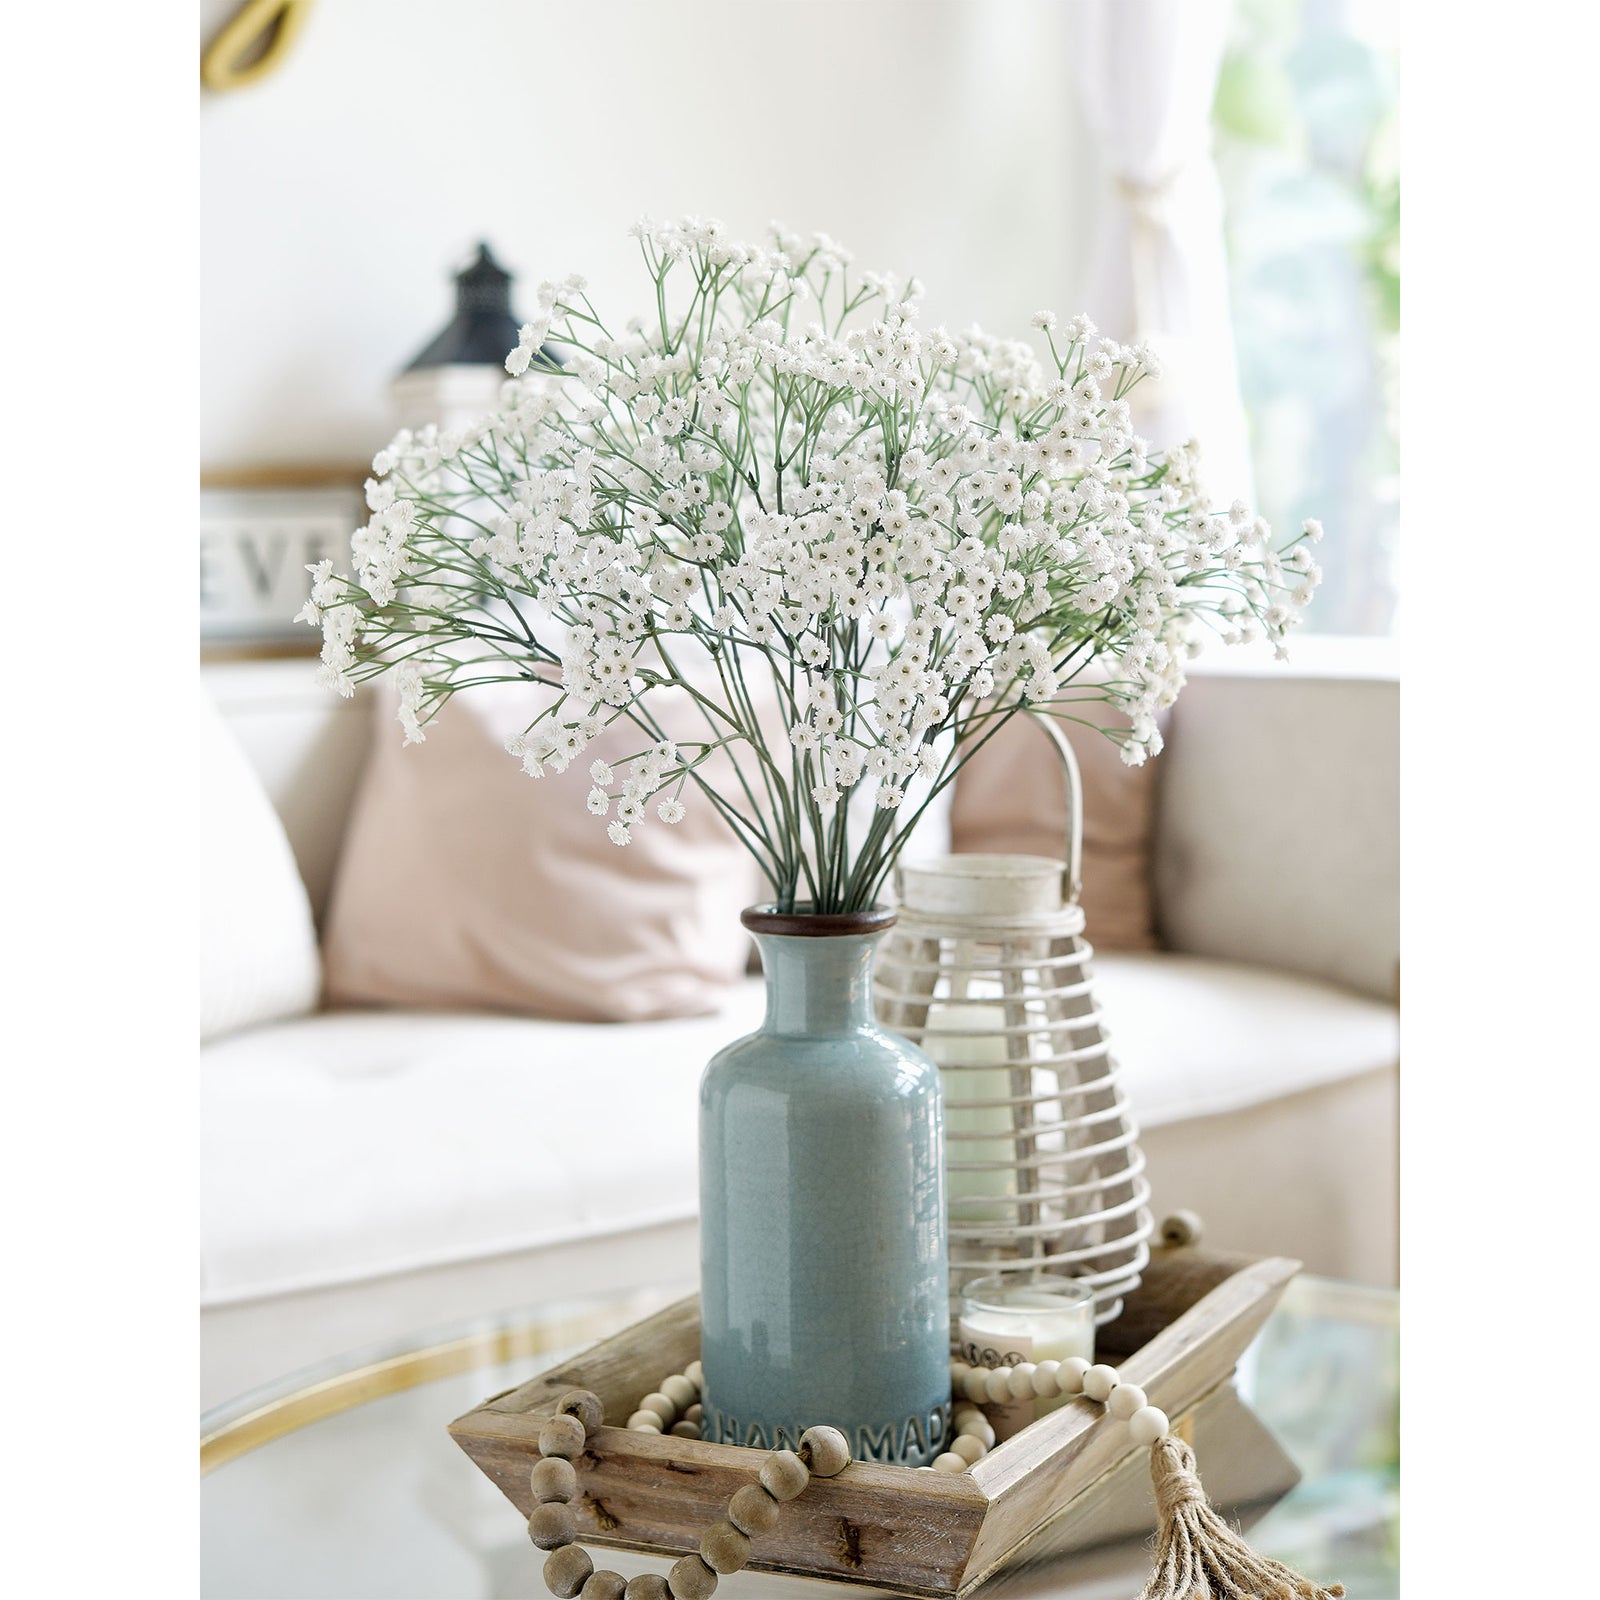 6 Stems 69cm Floral White Baby’s Breath Artificial Flowers Baby’s Breath Gypsophila Tall Long Stems